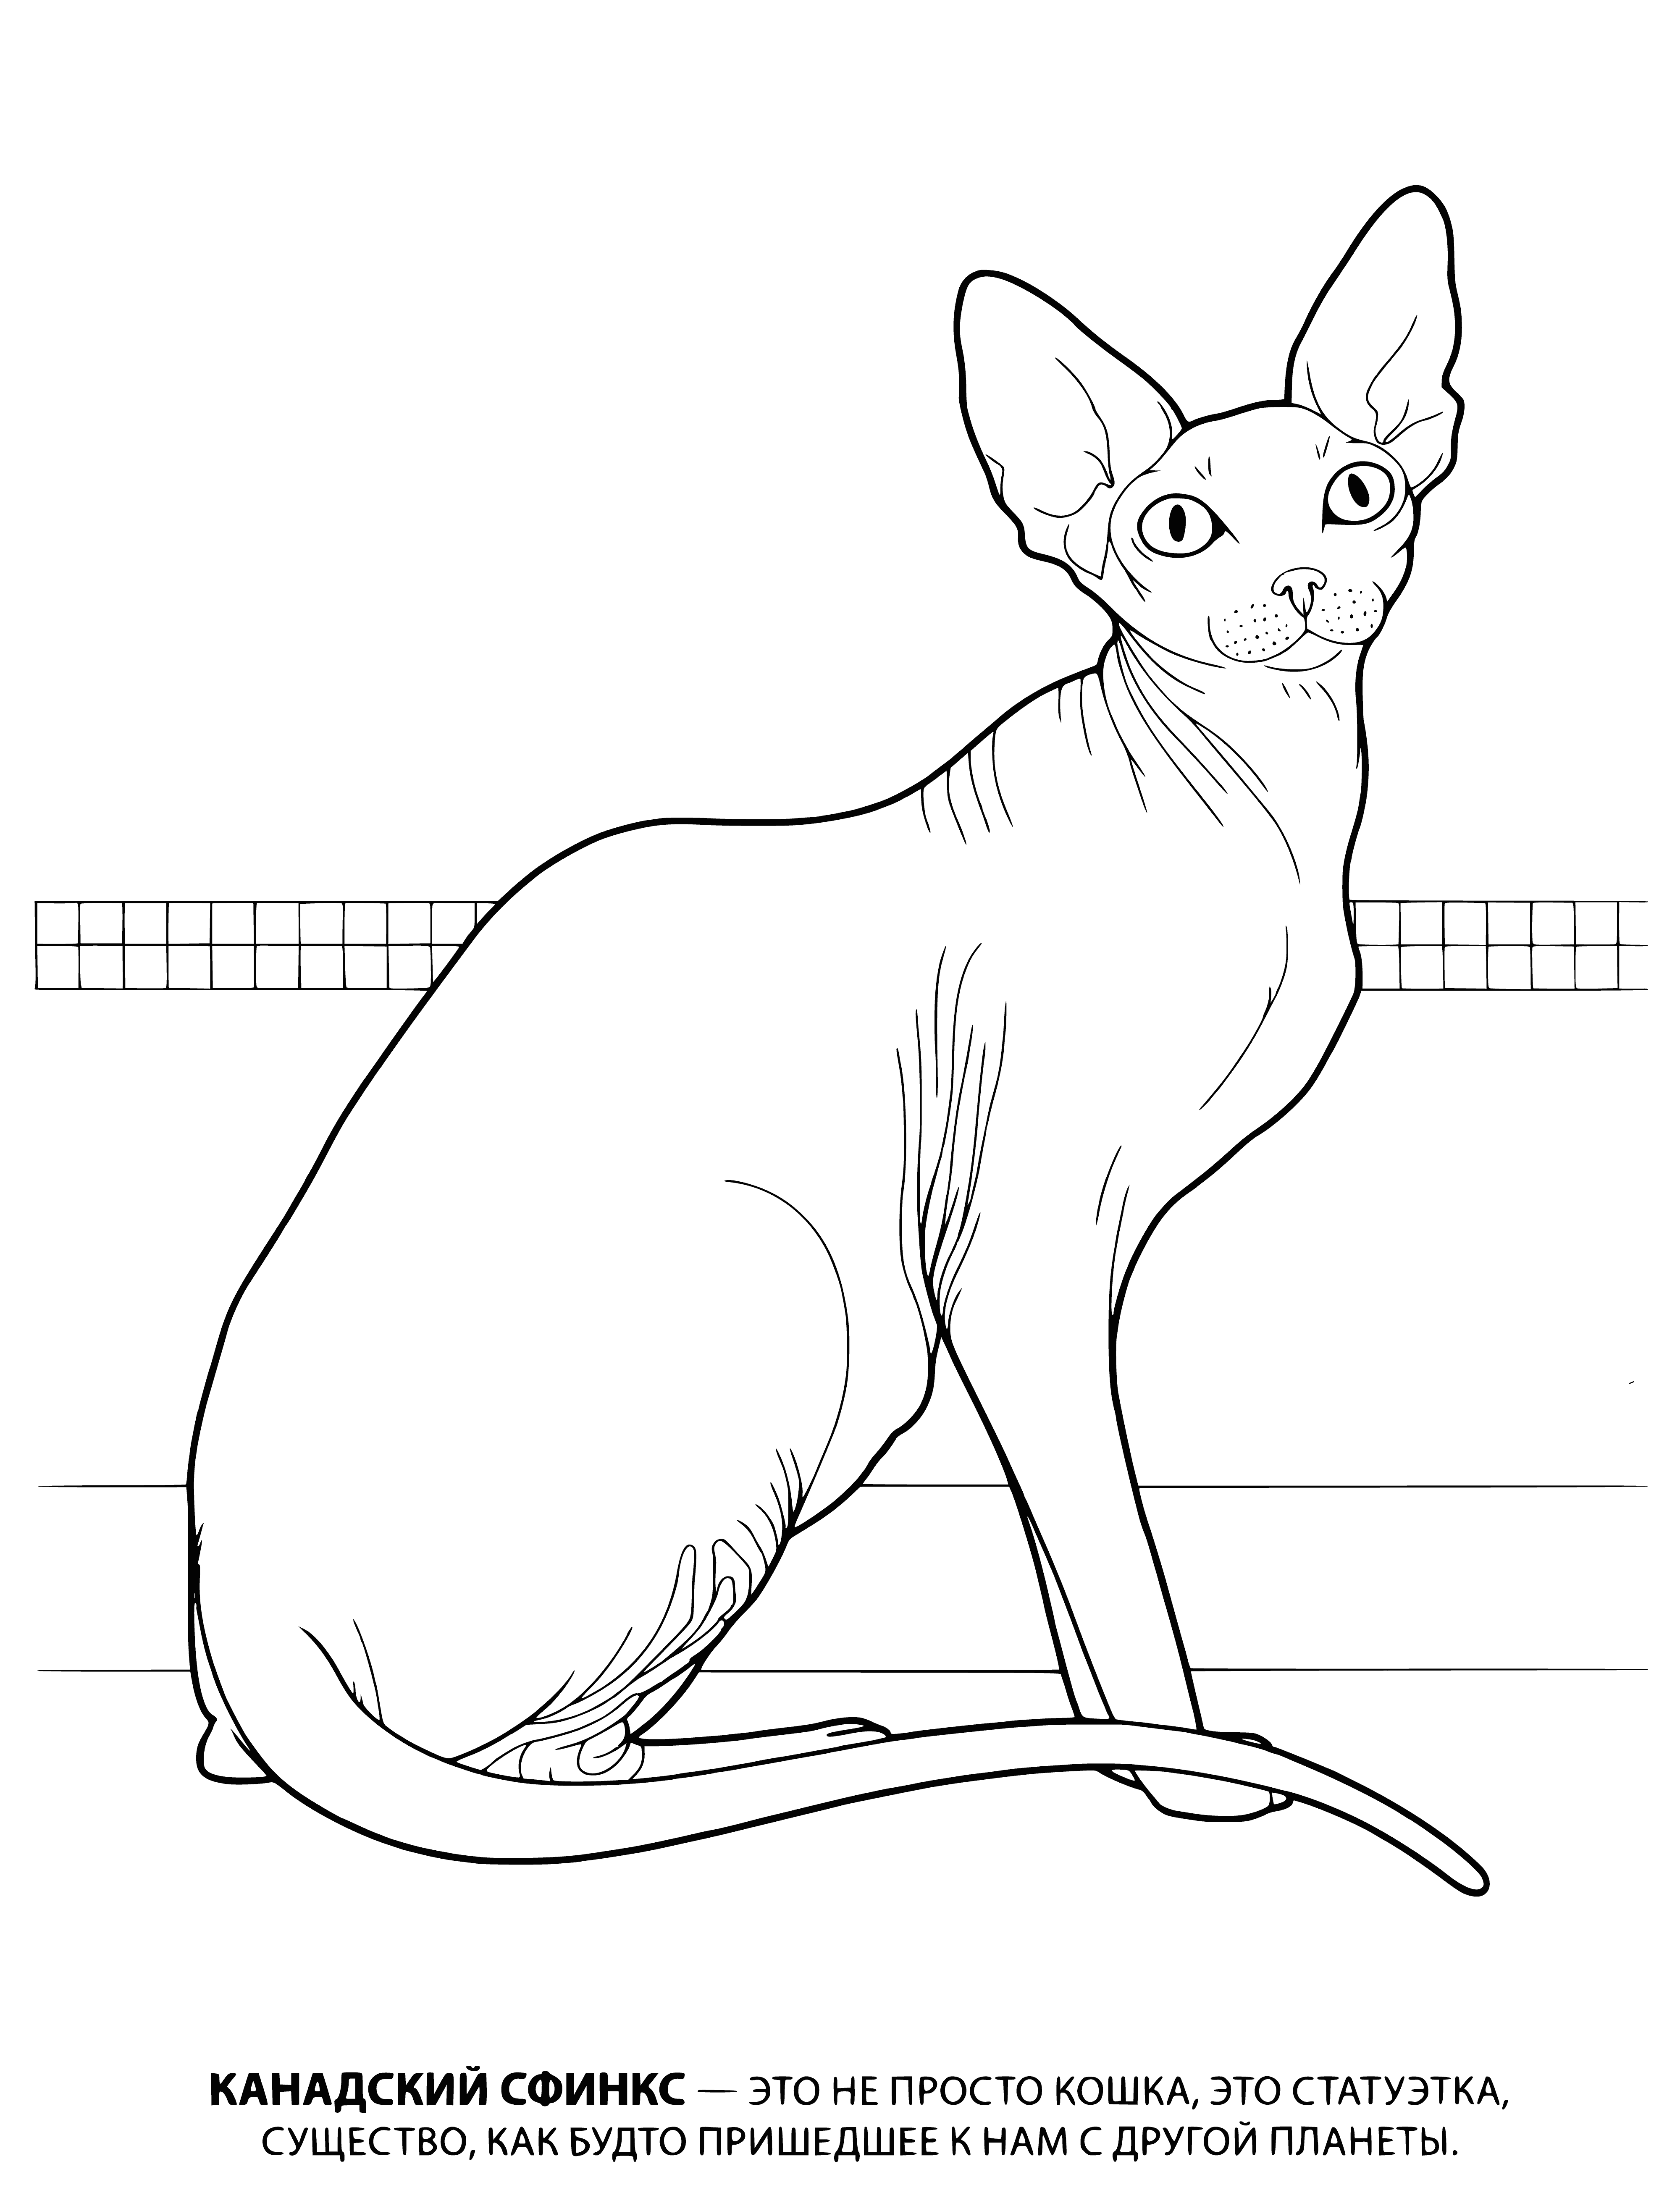 Canadian sphinx coloring page